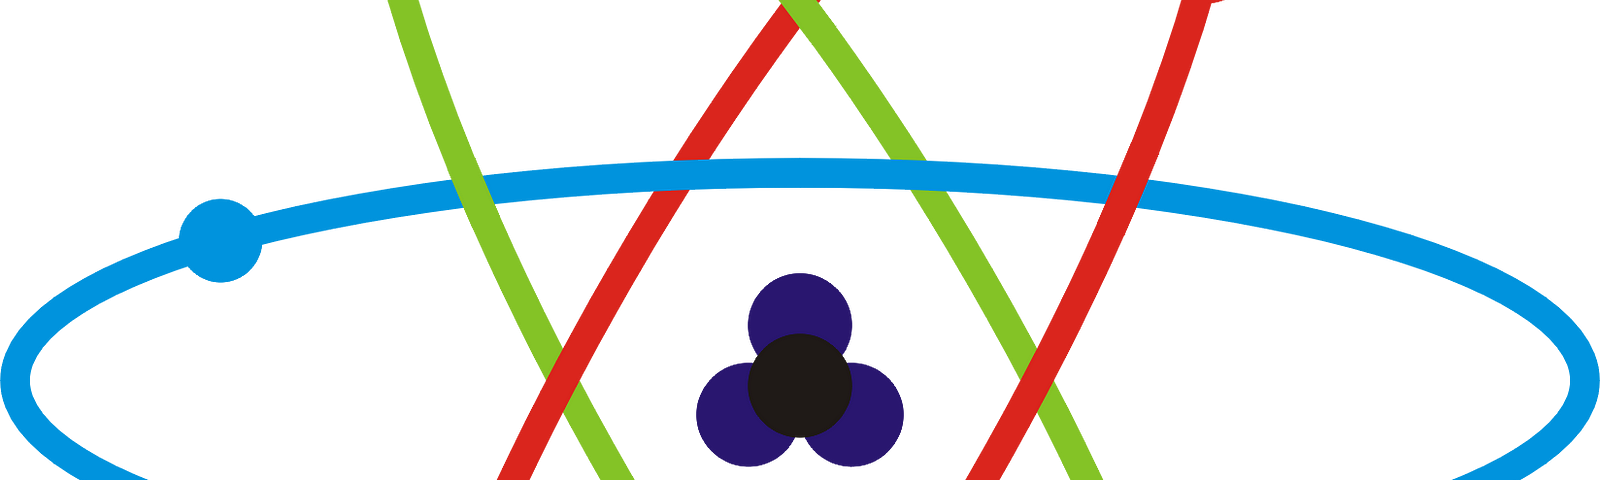 A 3 neutron atom with 3 electrons encircling the nucleus at difference valence energies as denoted by three different electron orbit colors: red, green and blue.